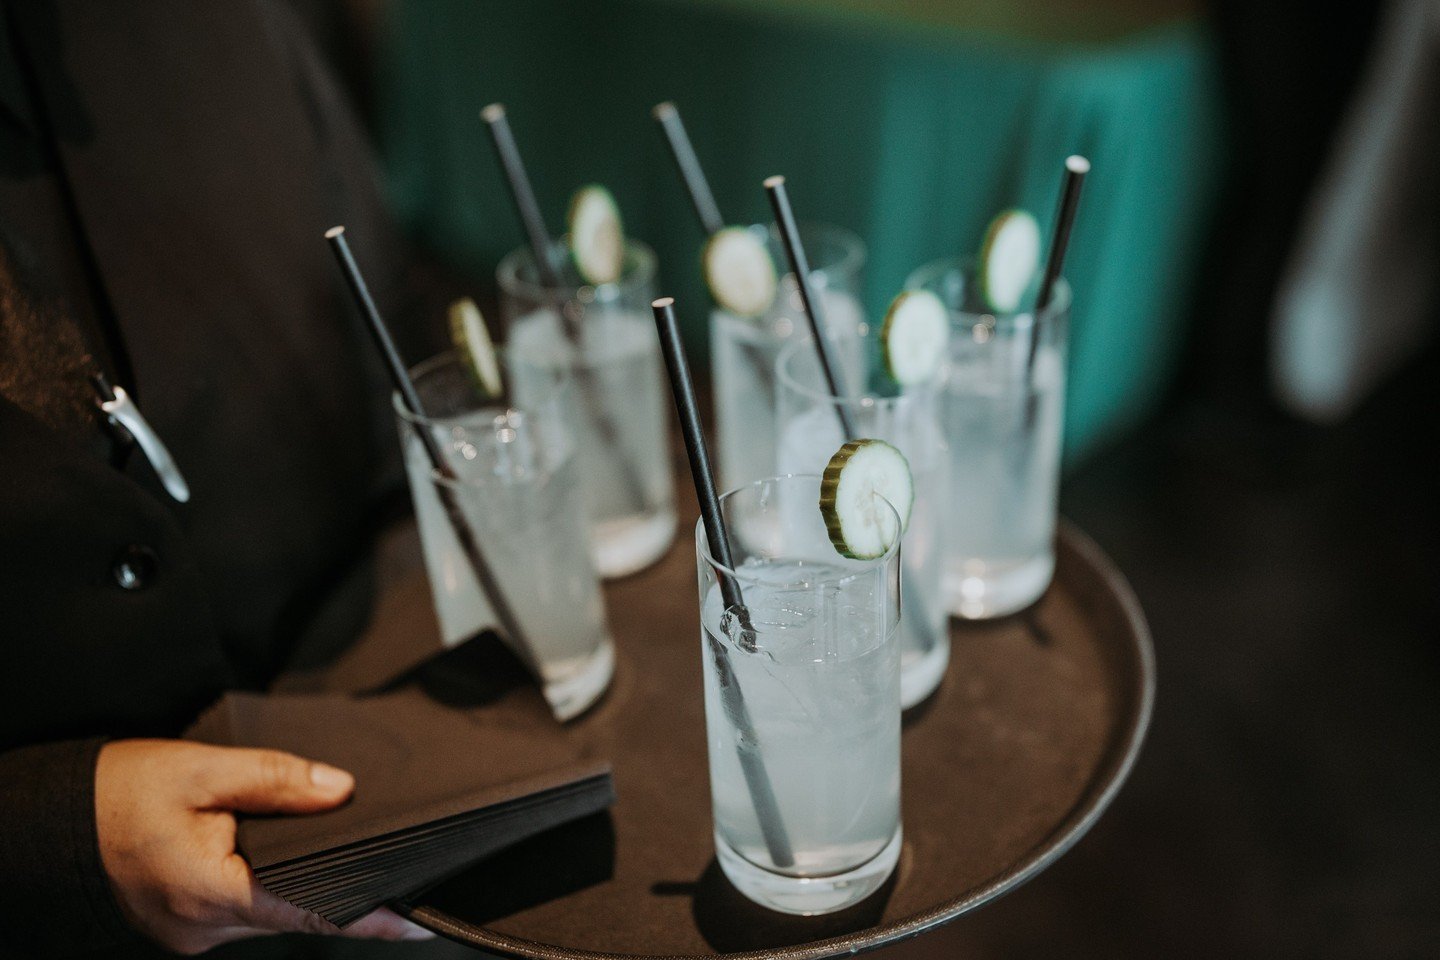 Cucumber cocktails are the perfect way to ring in a warm weather weekend 🥒🍹

📸 @kaileereiphotography
.
.
.
#lmcaters #chicagocatering #chicagoeventvenue #cateringchicago #chicagoevents #chicagoeventplanning #cucumbercocktail #eventcatering #eventp